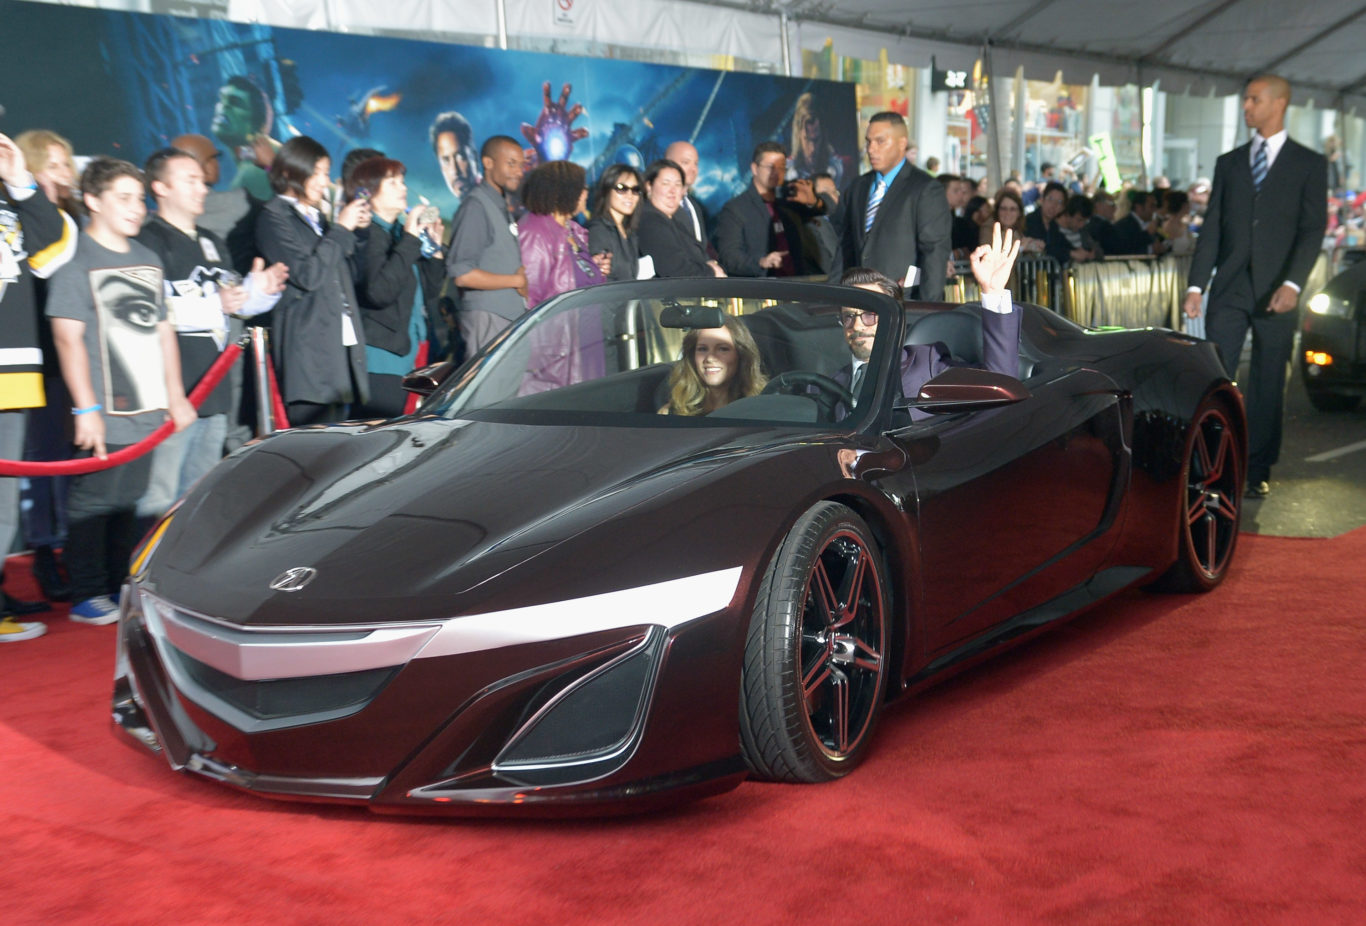 Robert Downey Jr. arrives in the NSX Roadster concept for the premiere of The Avengers.